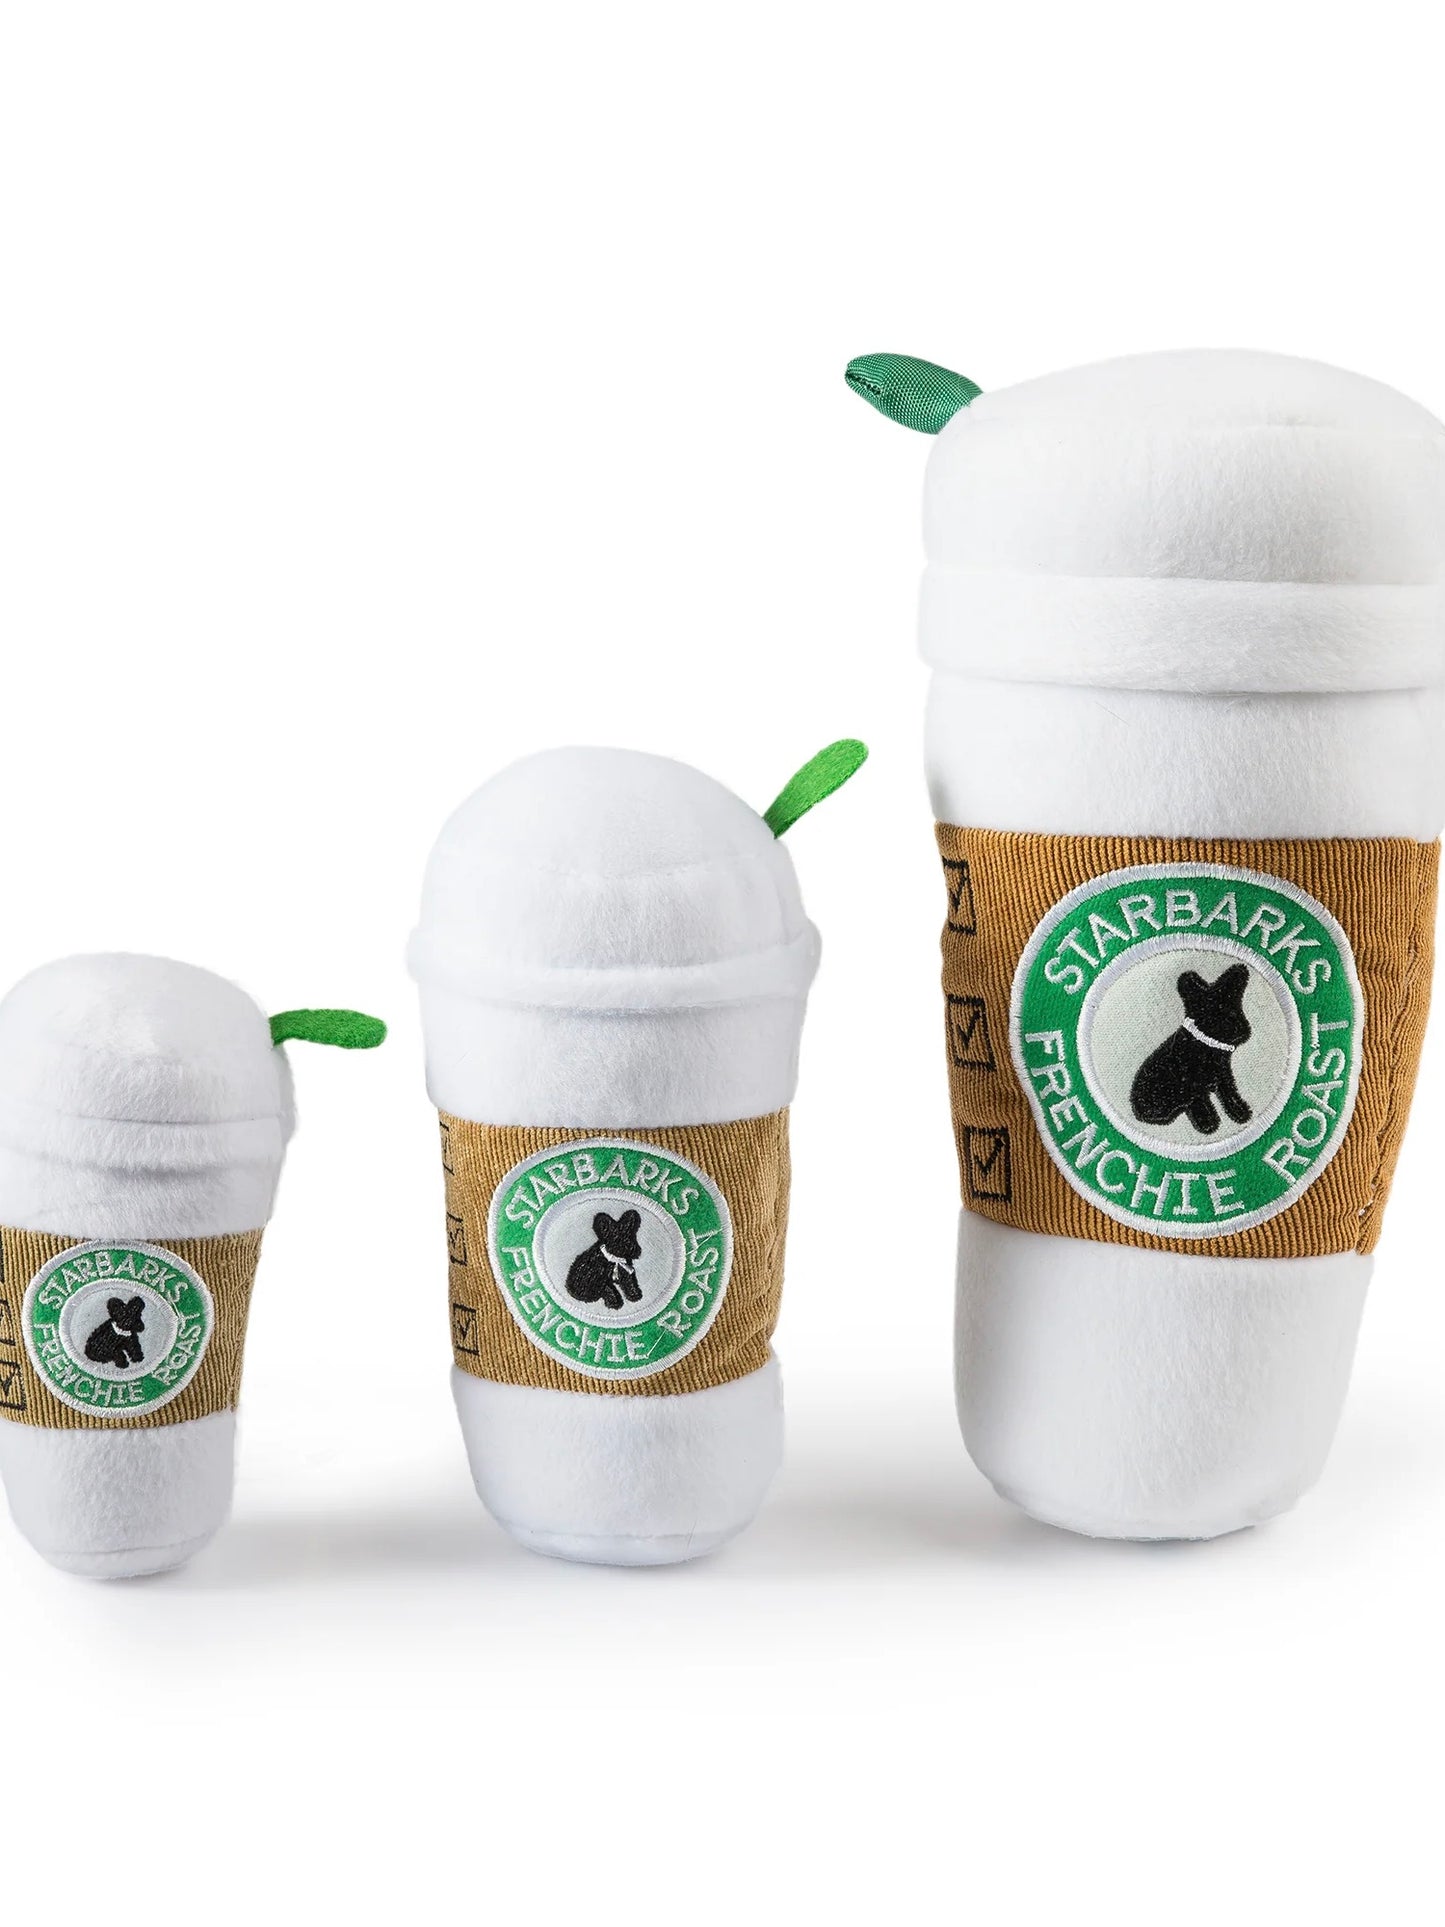 Starbucks Plush Toy With Lid